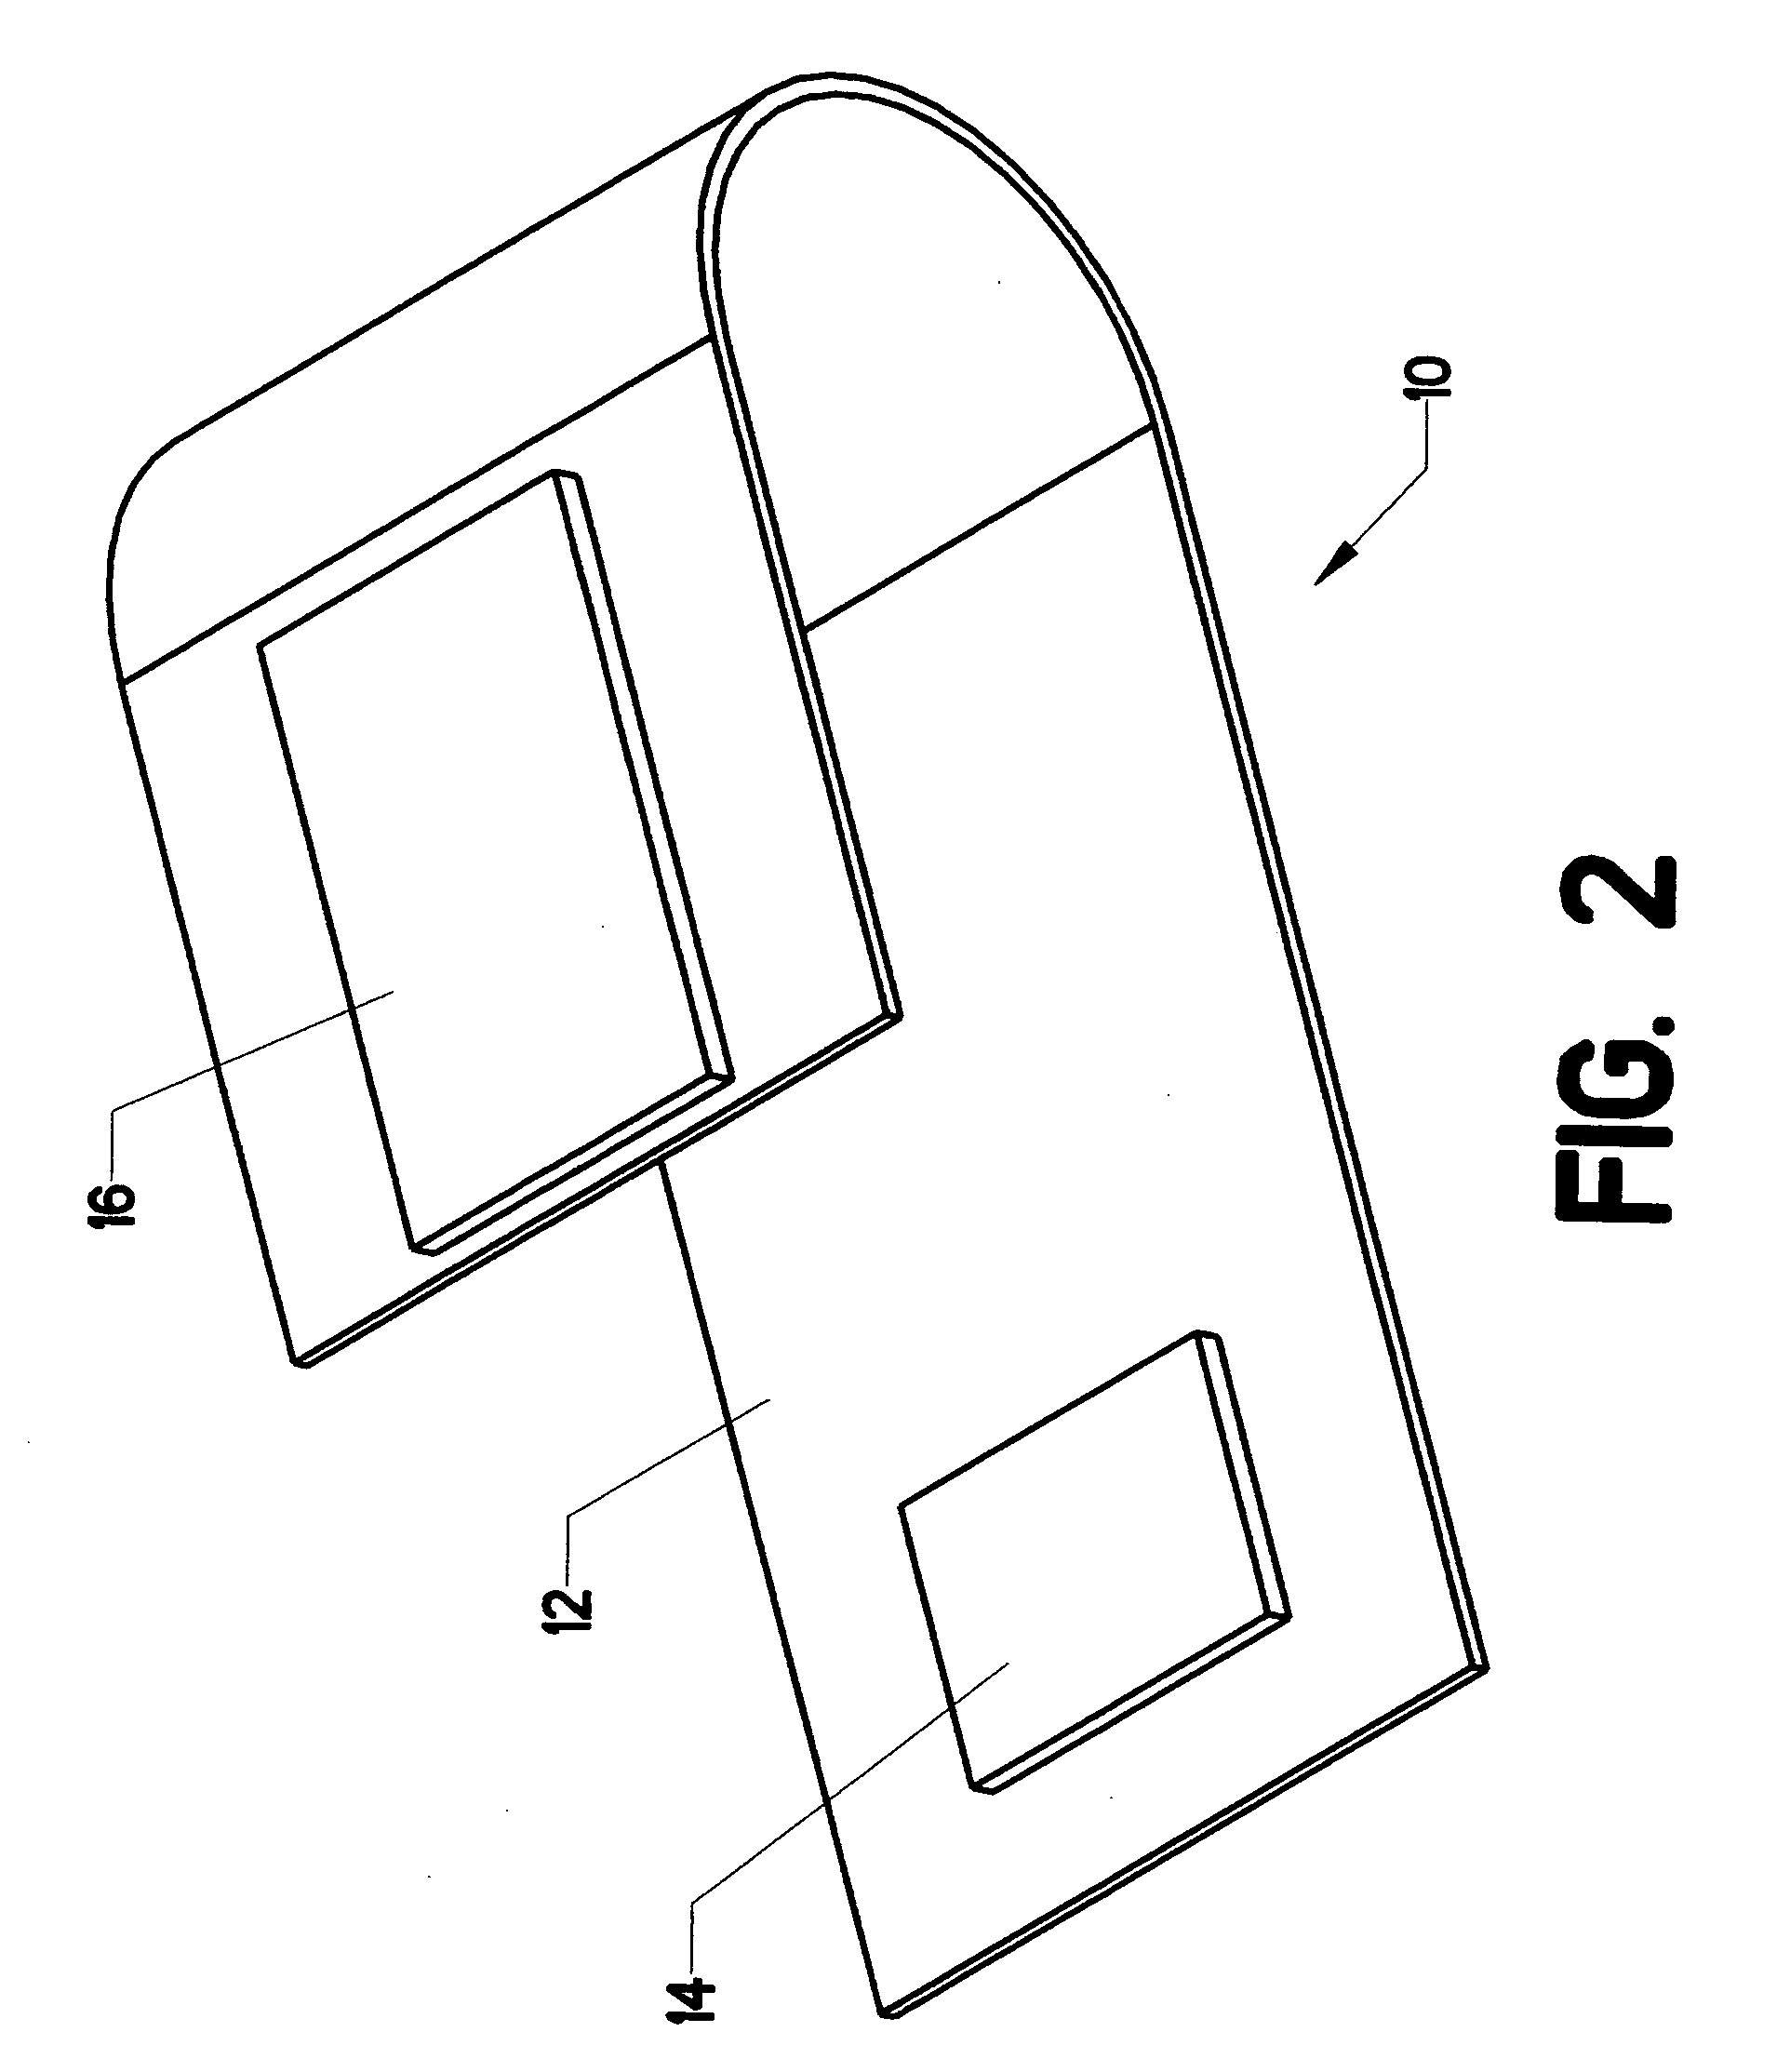 Method and apparatus for securing a tee shirt to a bra